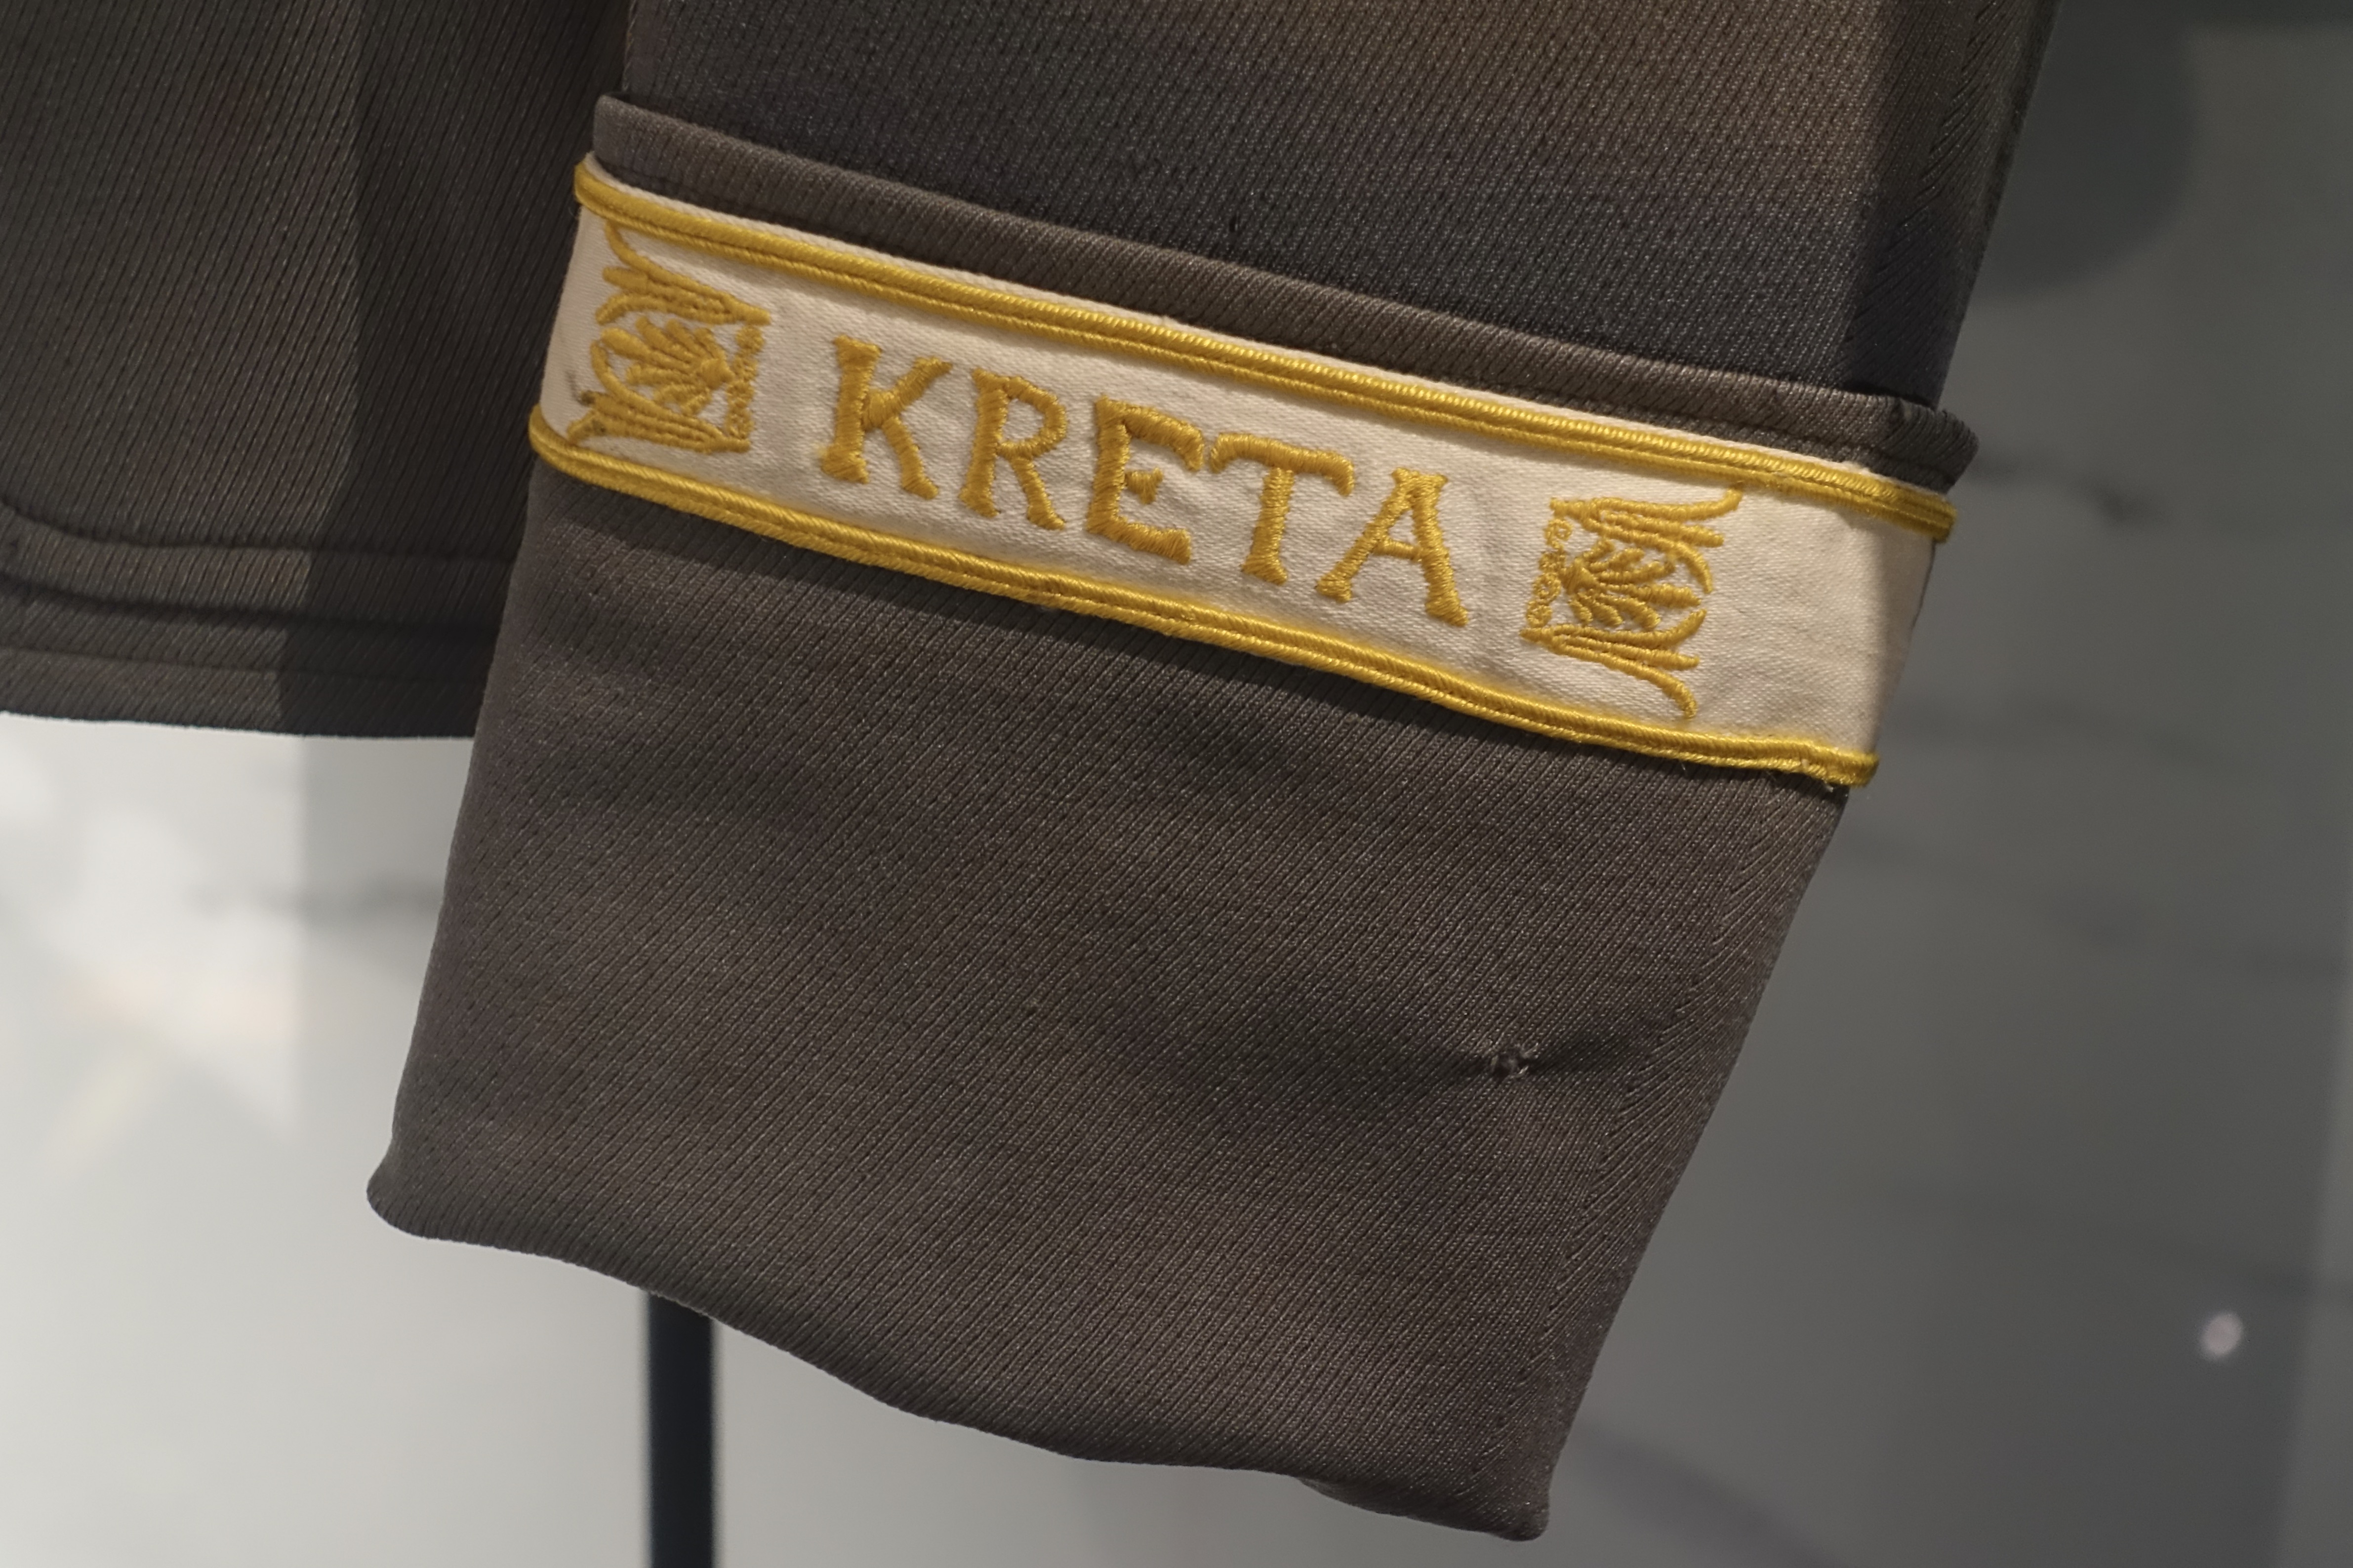 WWII GERMAN LUFTWAFFE TUNIC SLEEVE EMBROIDERED CUFF TITLE-AFRIKA KORP